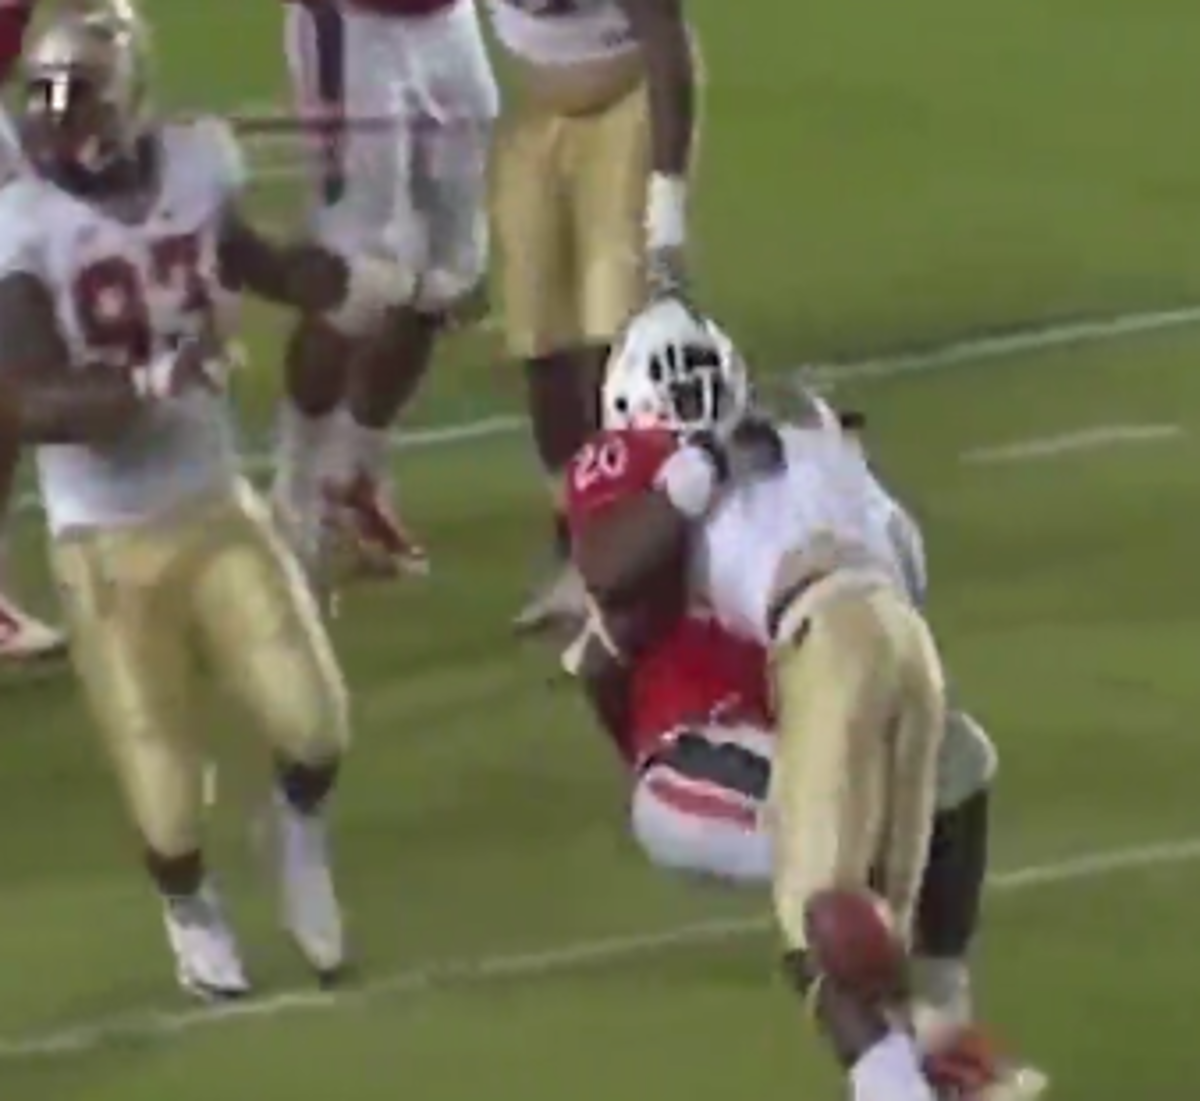 FSU player tackles a Miami ball carrier.